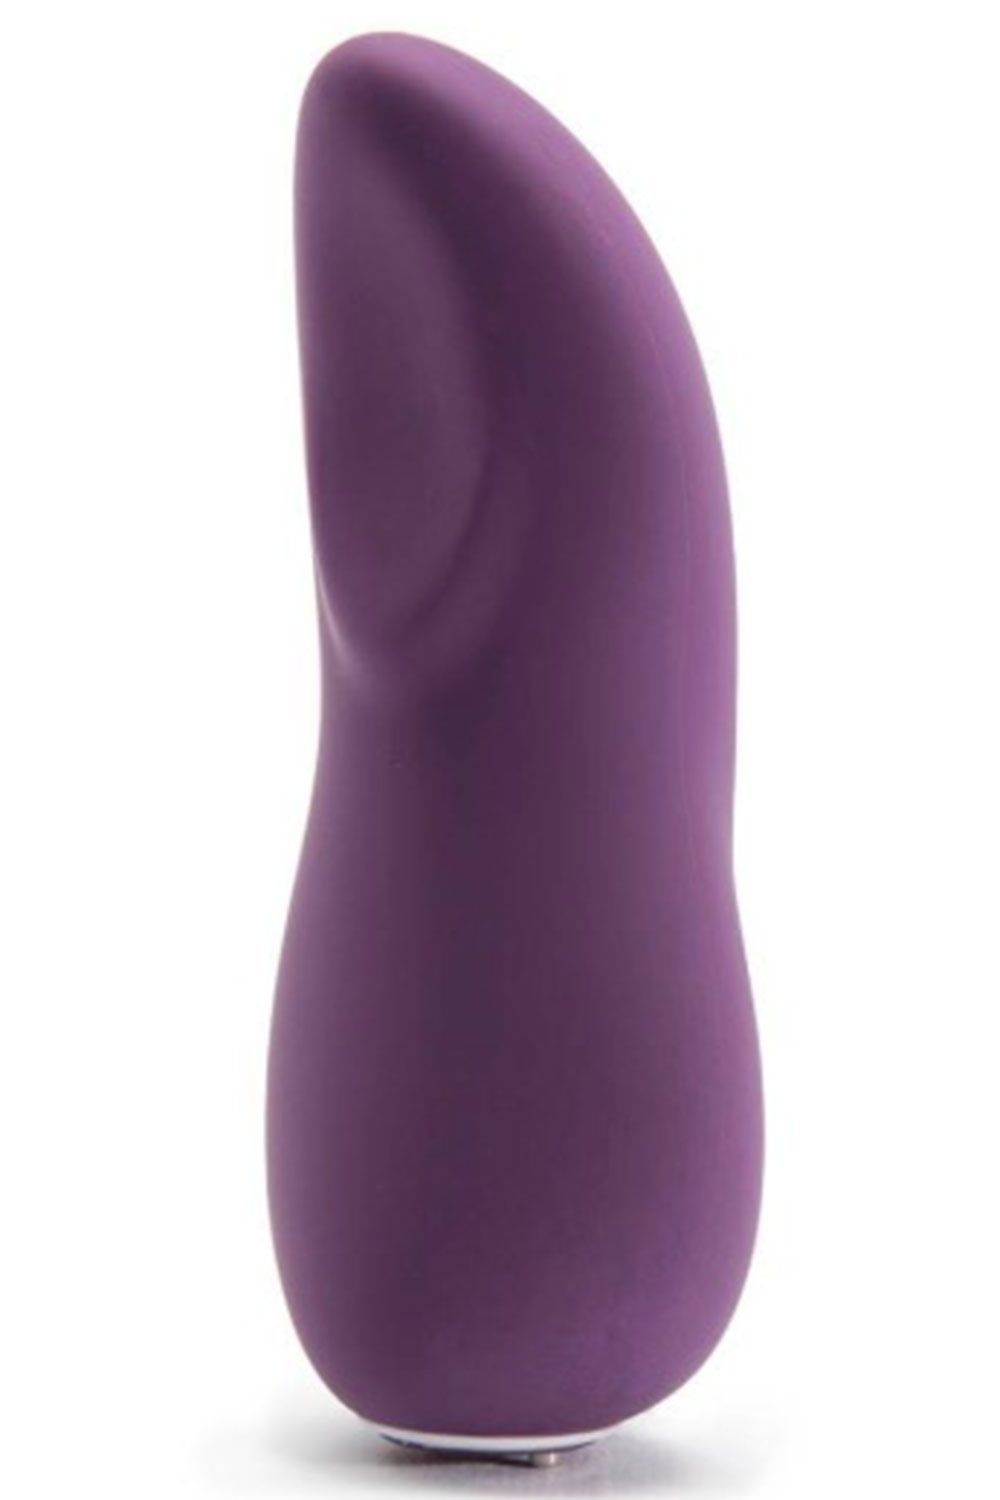 Clitoris suction that you sit on